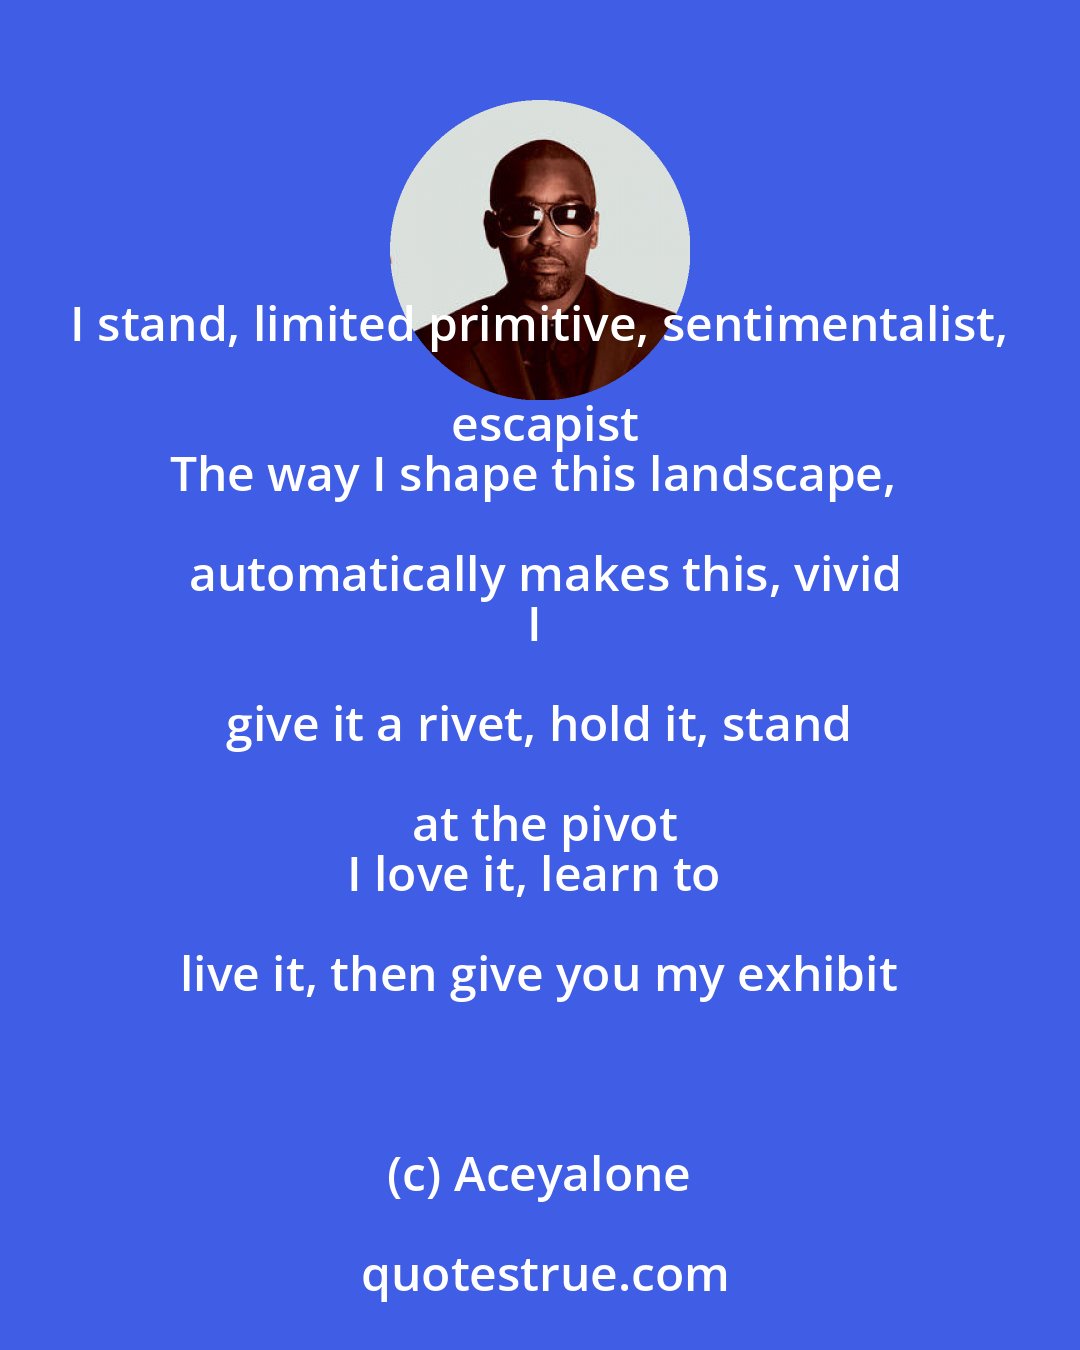 Aceyalone: I stand, limited primitive, sentimentalist, escapist
The way I shape this landscape, automatically makes this, vivid
I give it a rivet, hold it, stand at the pivot
I love it, learn to live it, then give you my exhibit